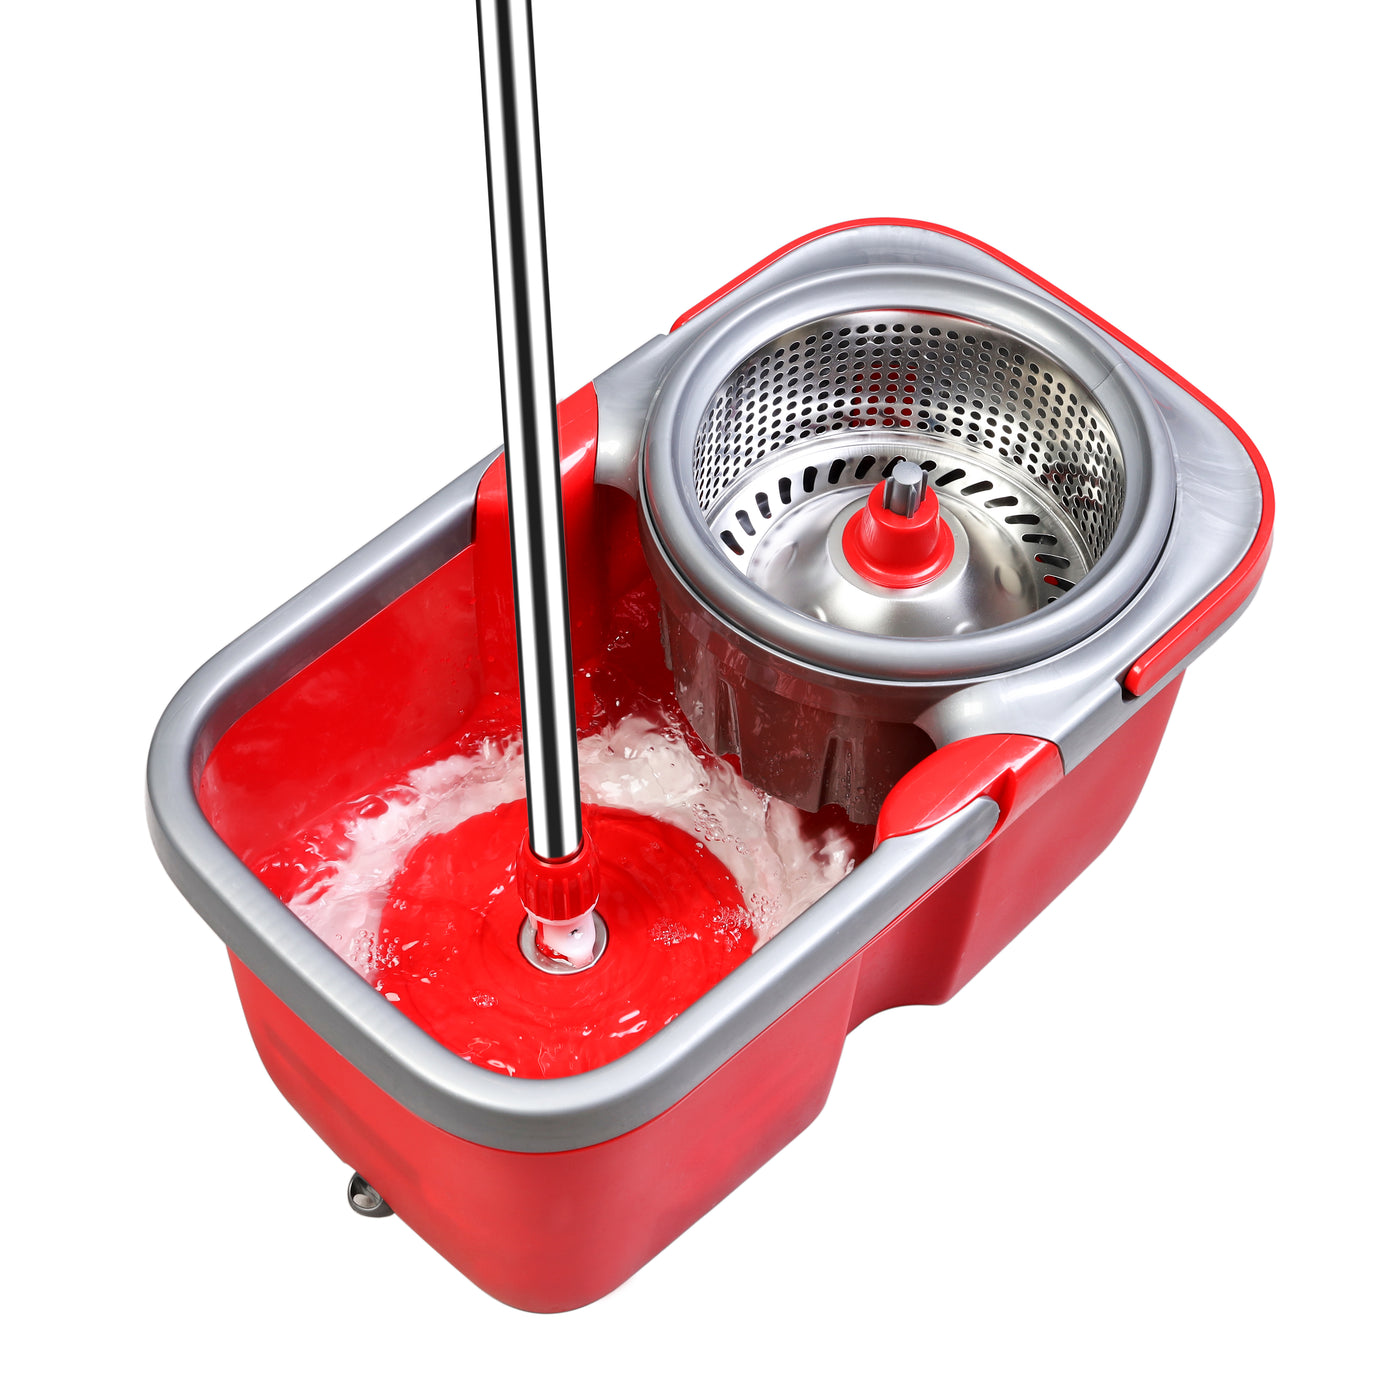 Oshang Stainless Steel Spin Mop and Bucket SP2 – oshang